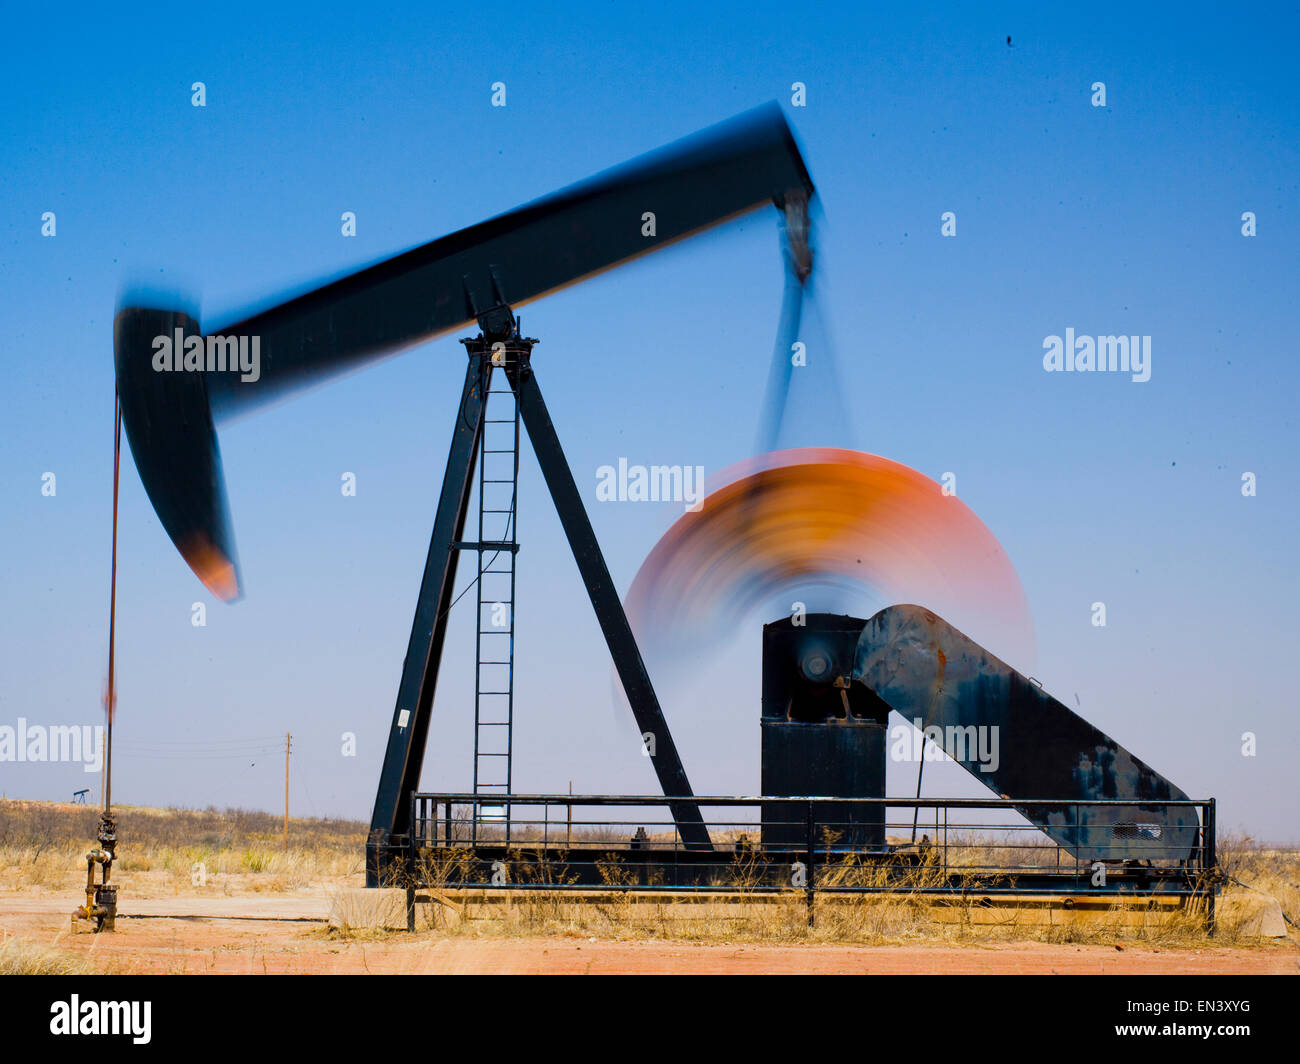 oil rig in motion Stock Photo